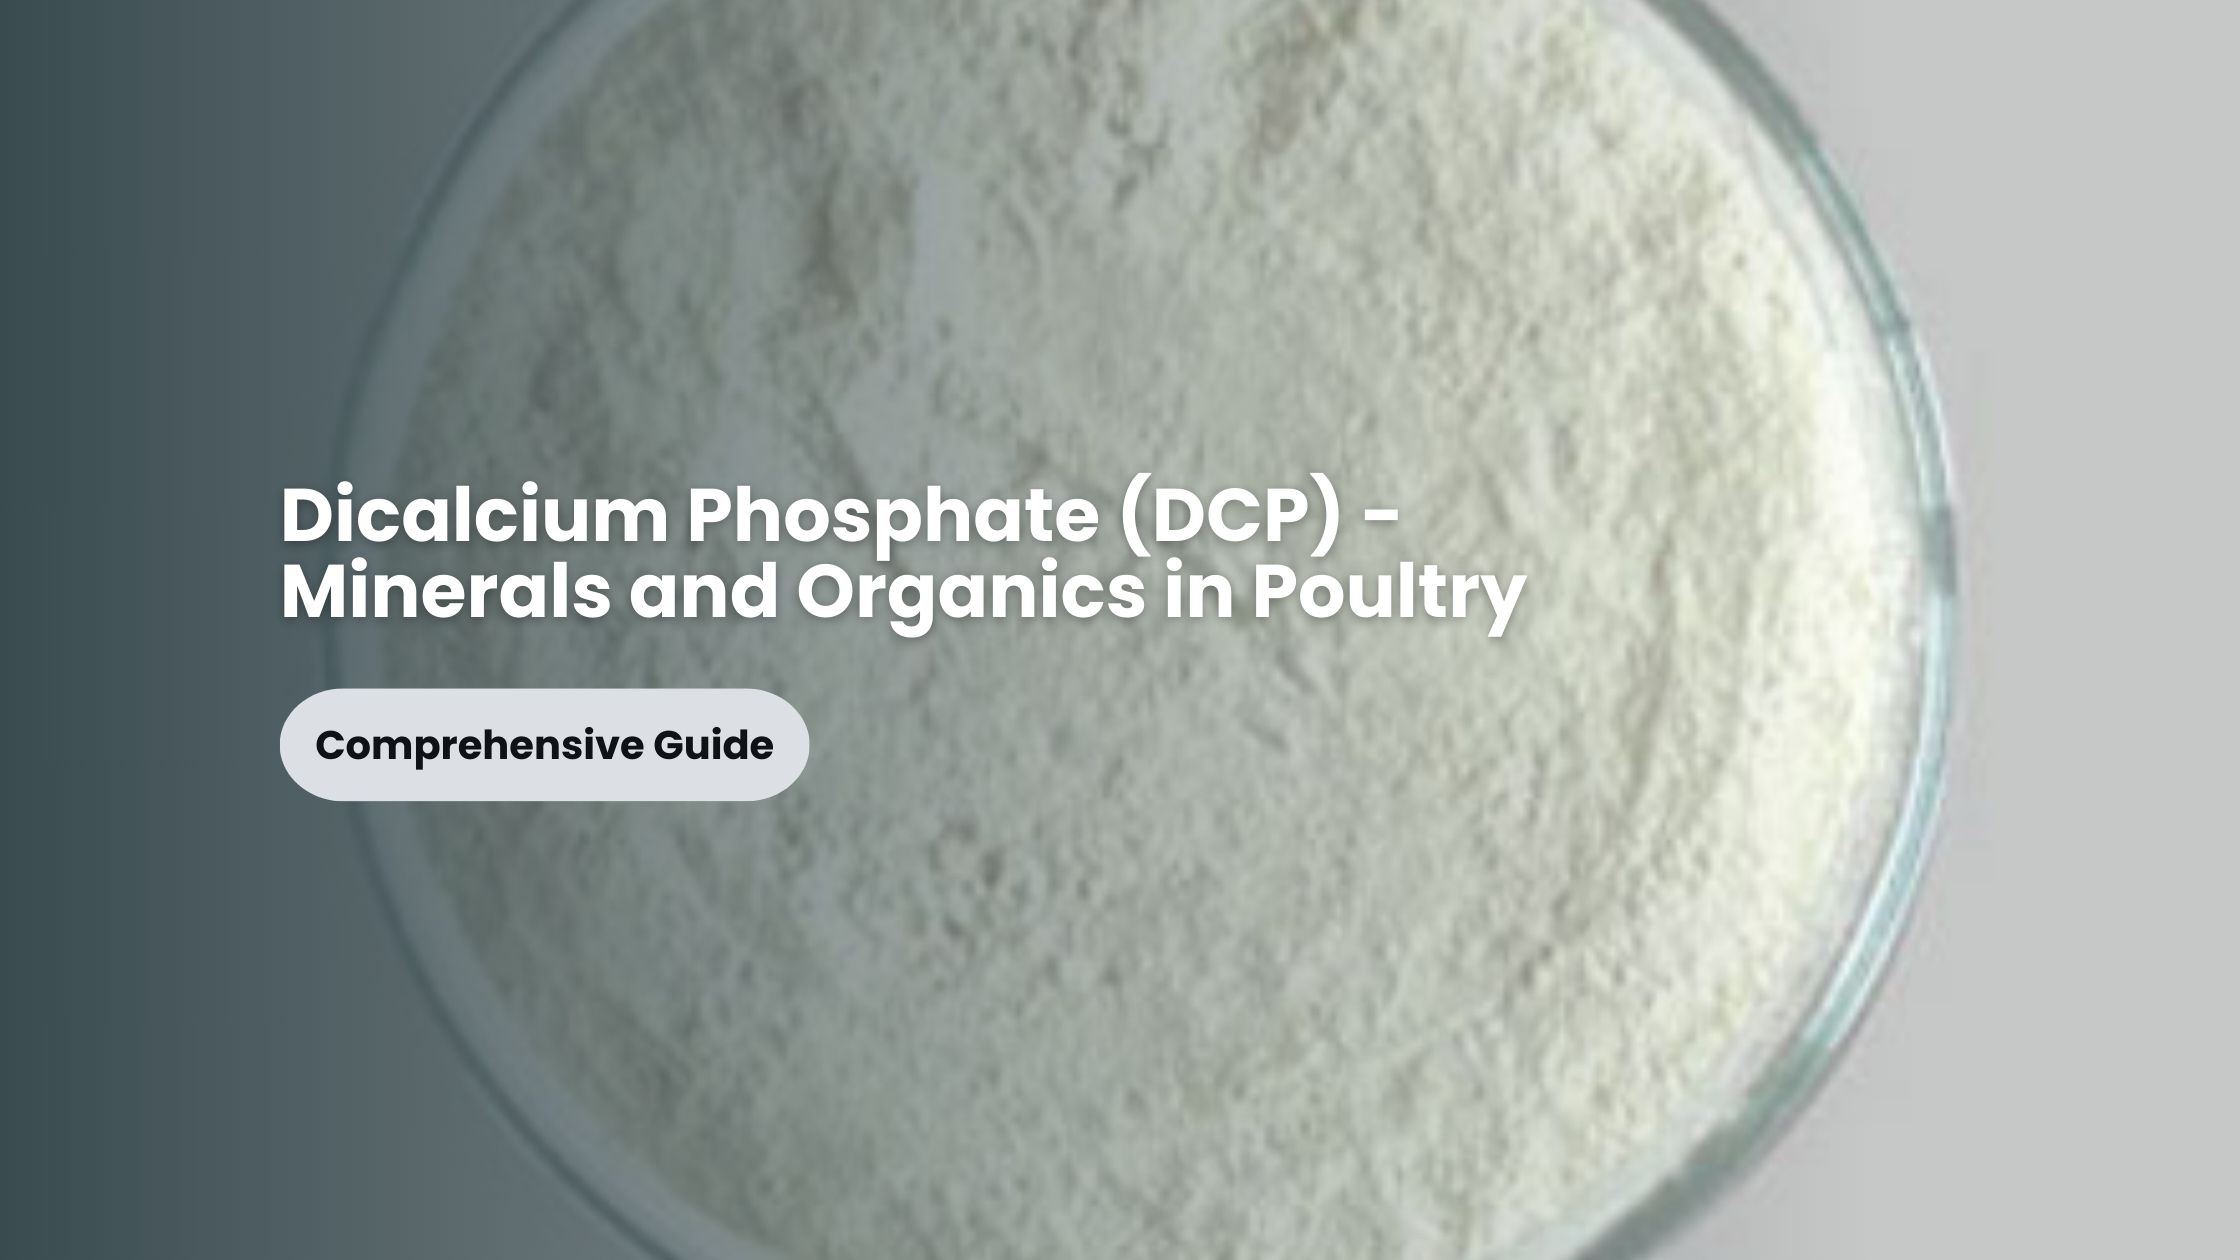 Dicalcium Phosphate (DCP) – Minerals and Organics in Poultry – A Comprehensive Guide